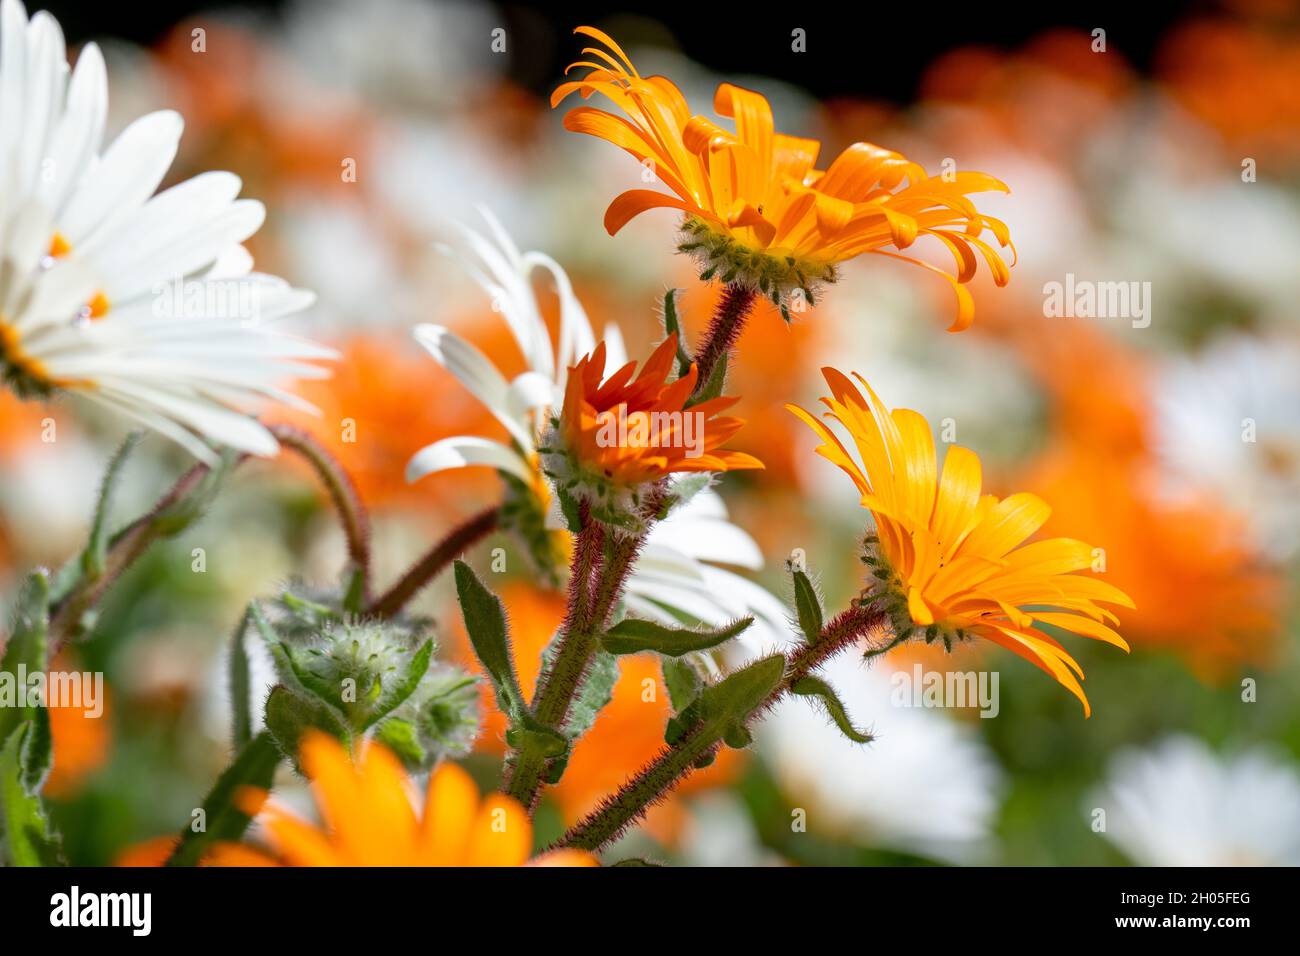 A field of white and orange flowers in Cape Town, South Africa. Stock Photo